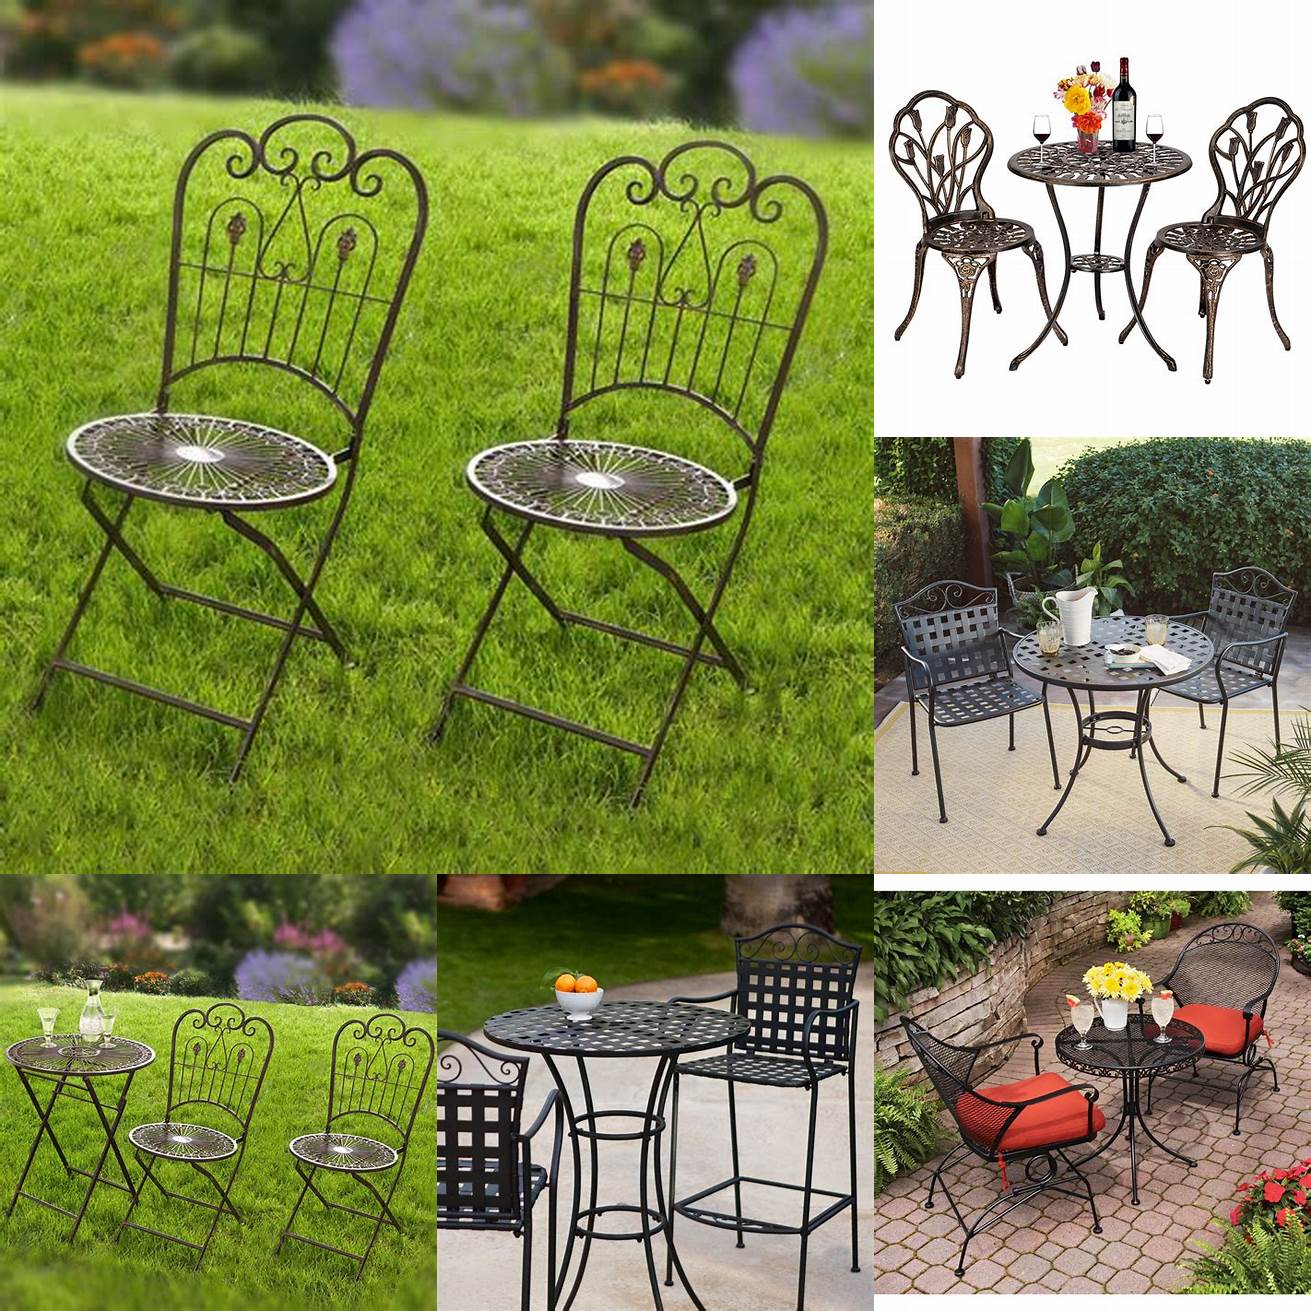 Bistro set with wrought iron chairs